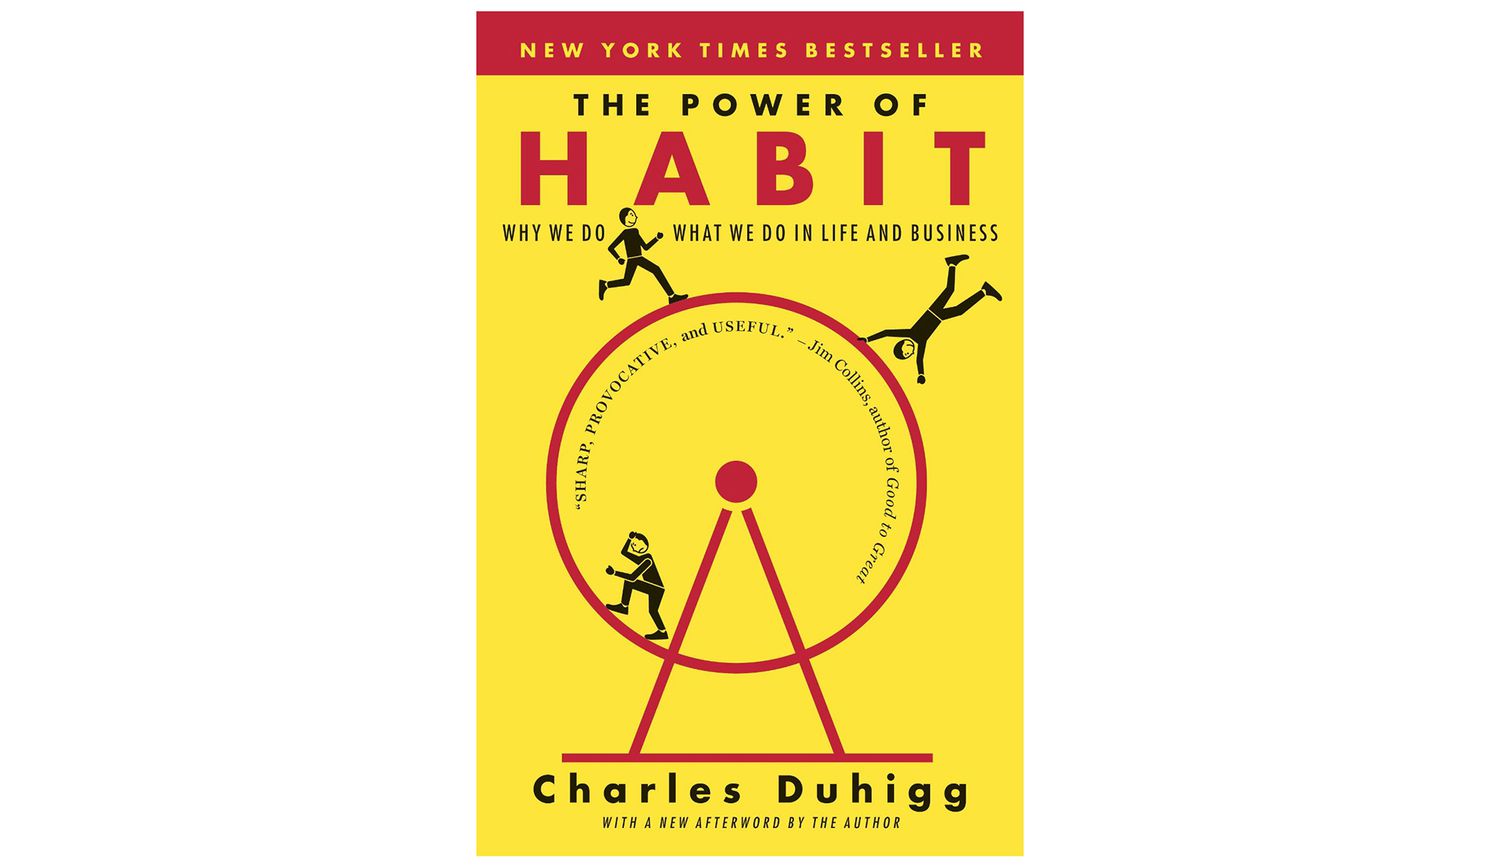 The Power of Habit, by Charles Duhigg